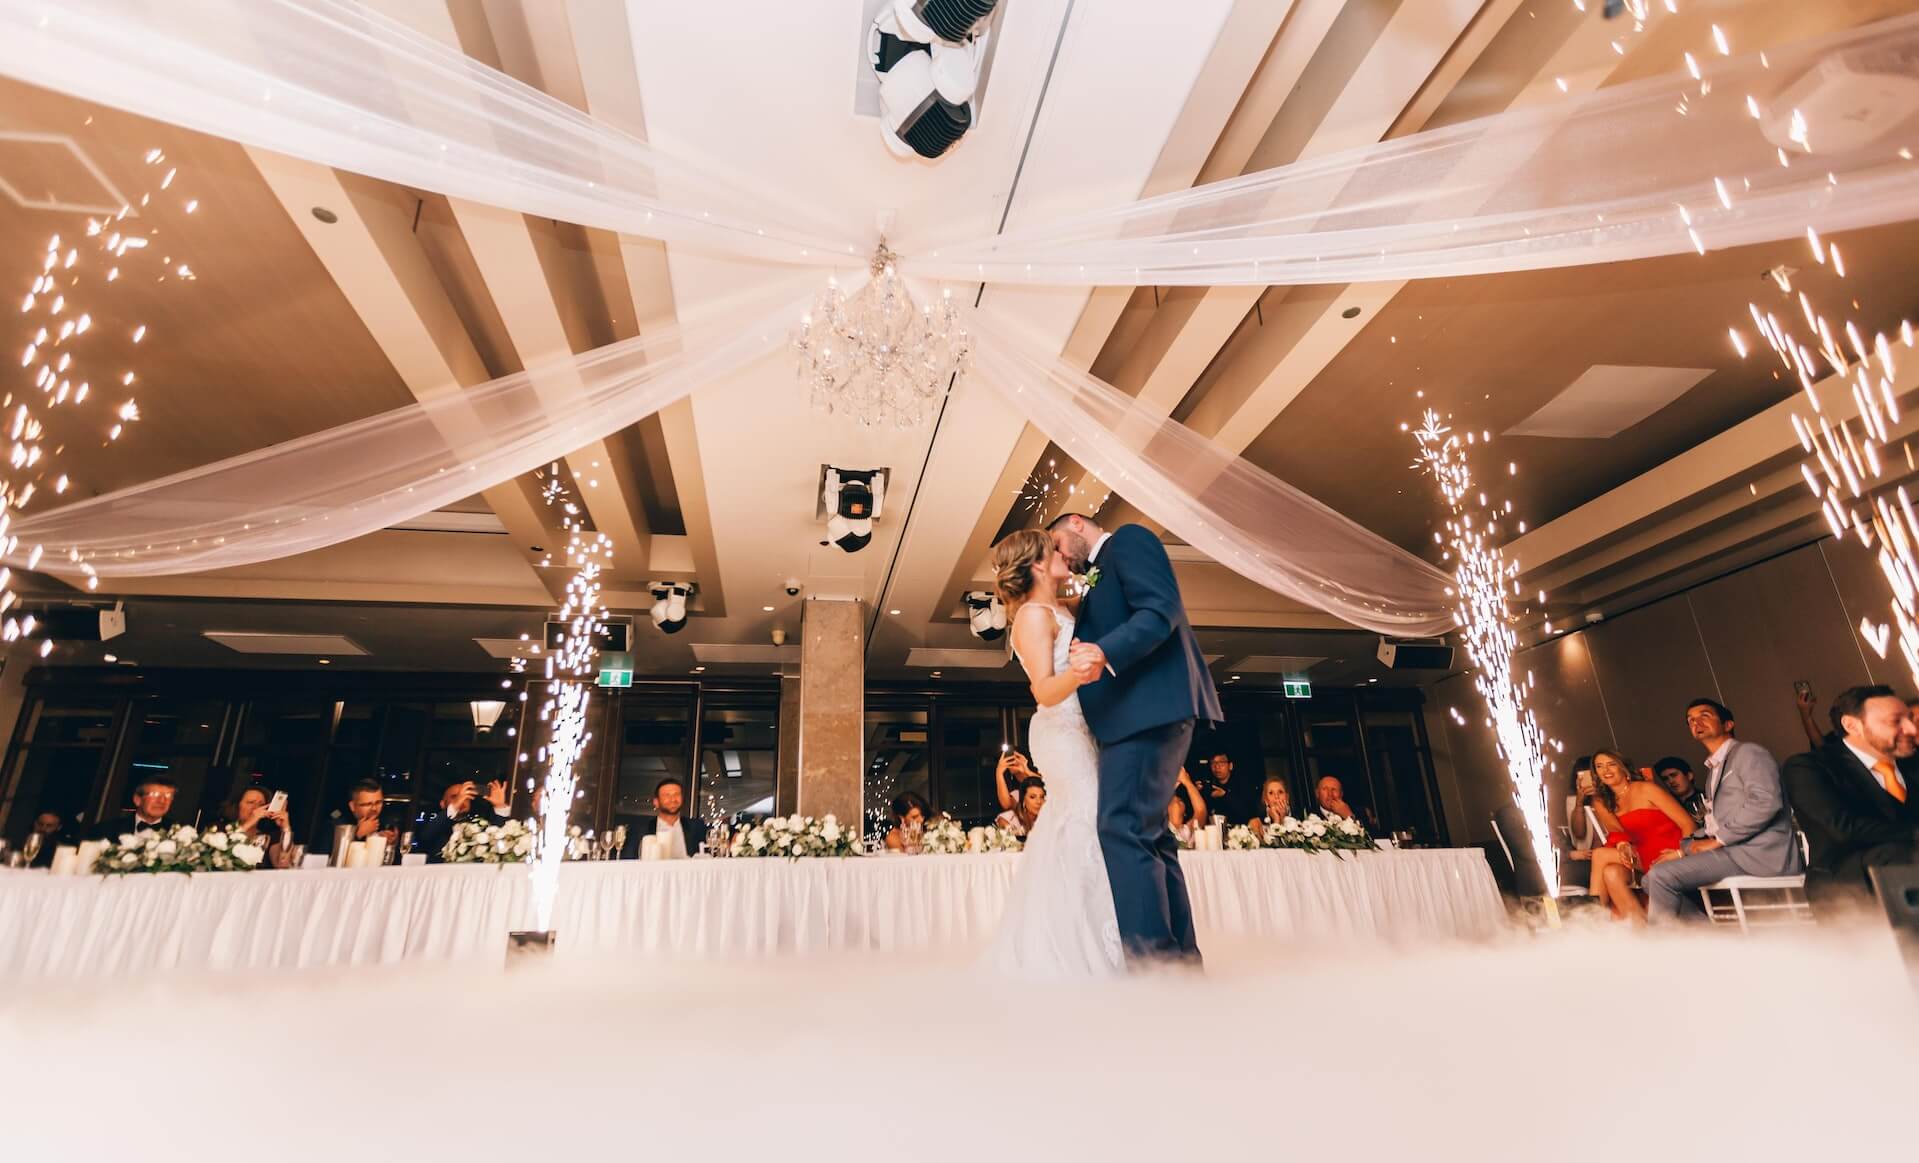 Cincinnati DJs create a magical atmosphere as a bride and groom share their first dance under a cloud of sparklers.